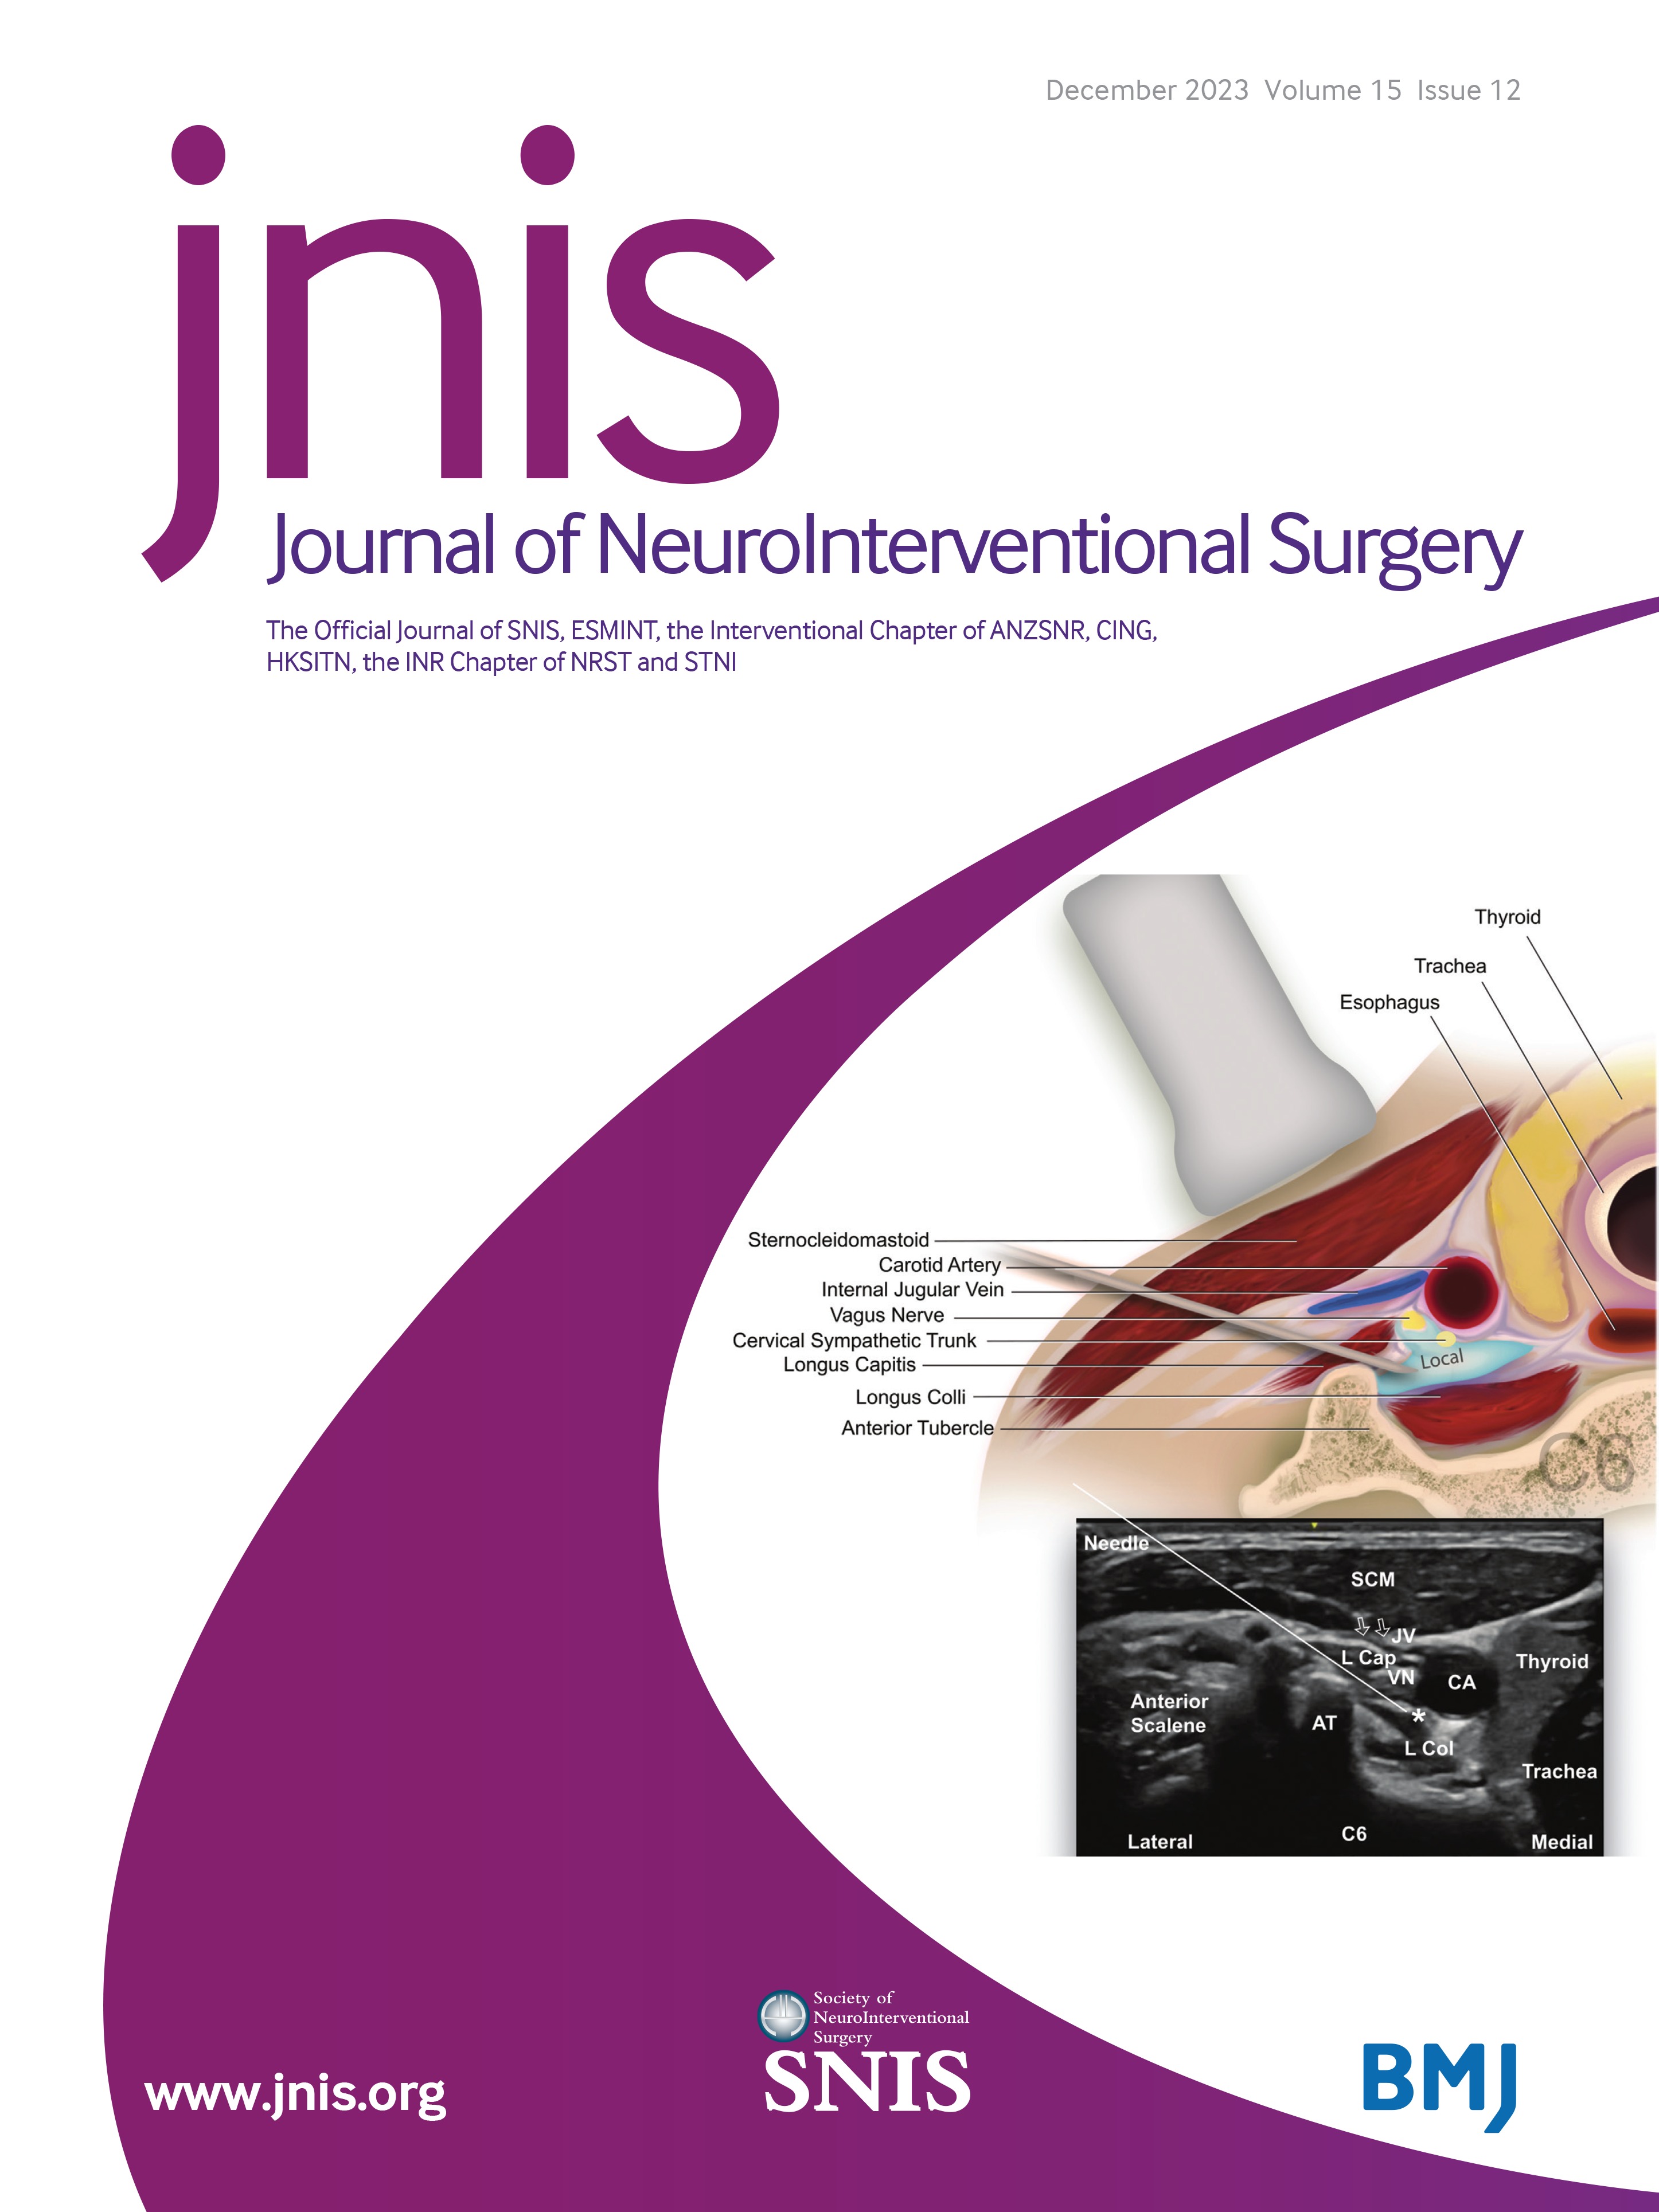 Overcoming roadblocks in clinical innovation via high fidelity simulation: use of a phantom simulator to achieve FDA and IRB approval of a clinical trial of fetal embolization of vein of Galen malformations